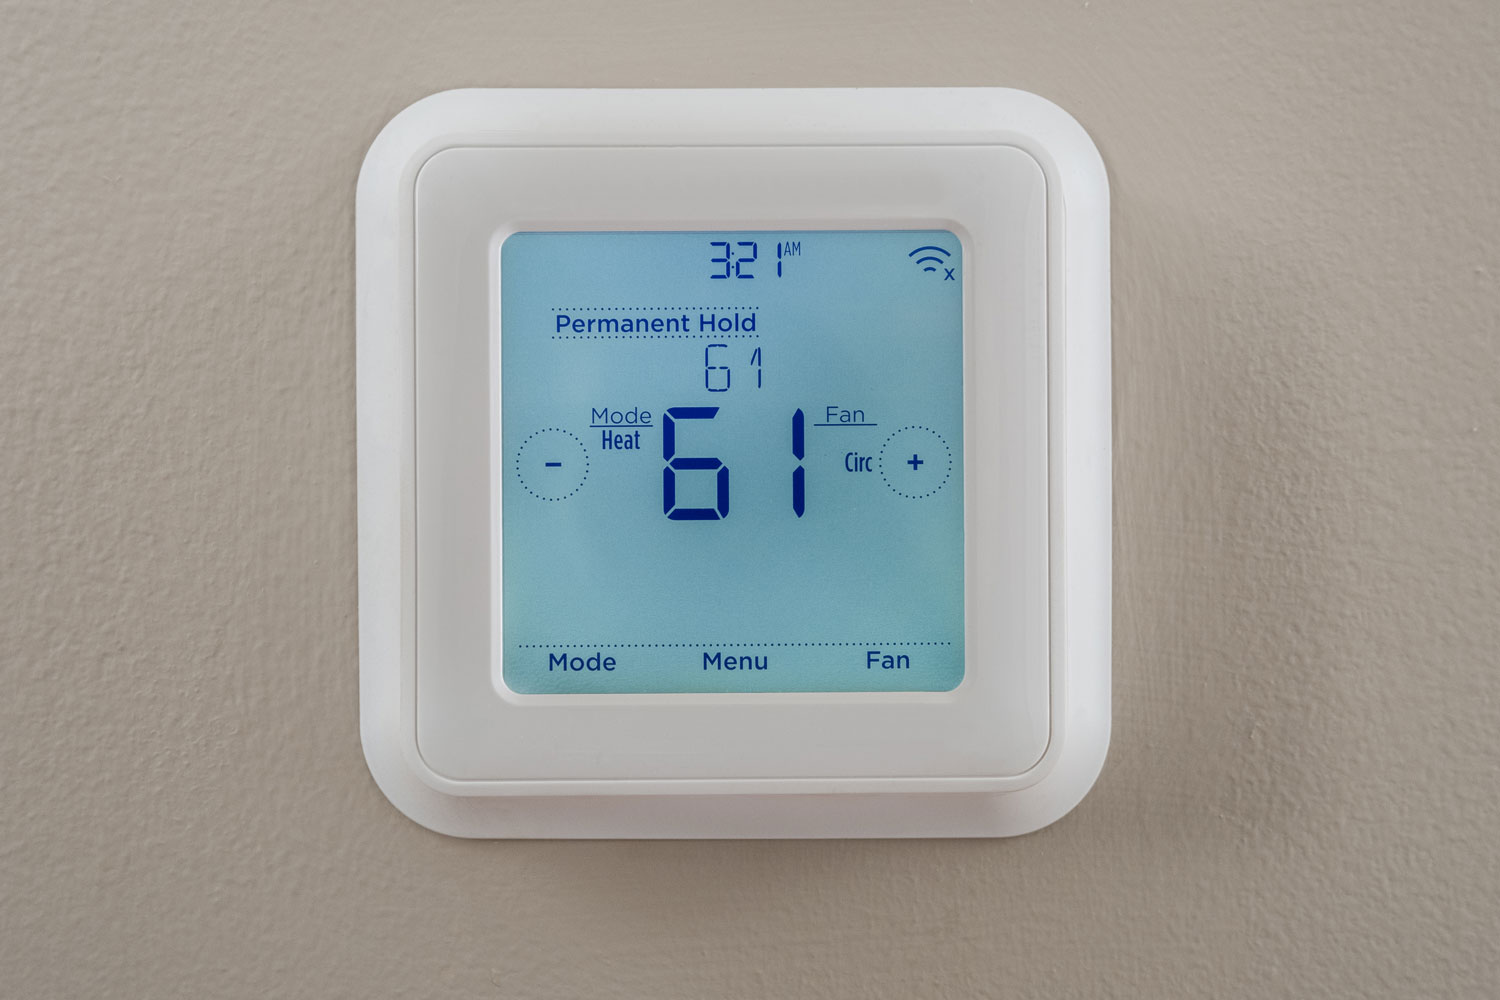 A thermostat mounted on the wall set at 61 degrees